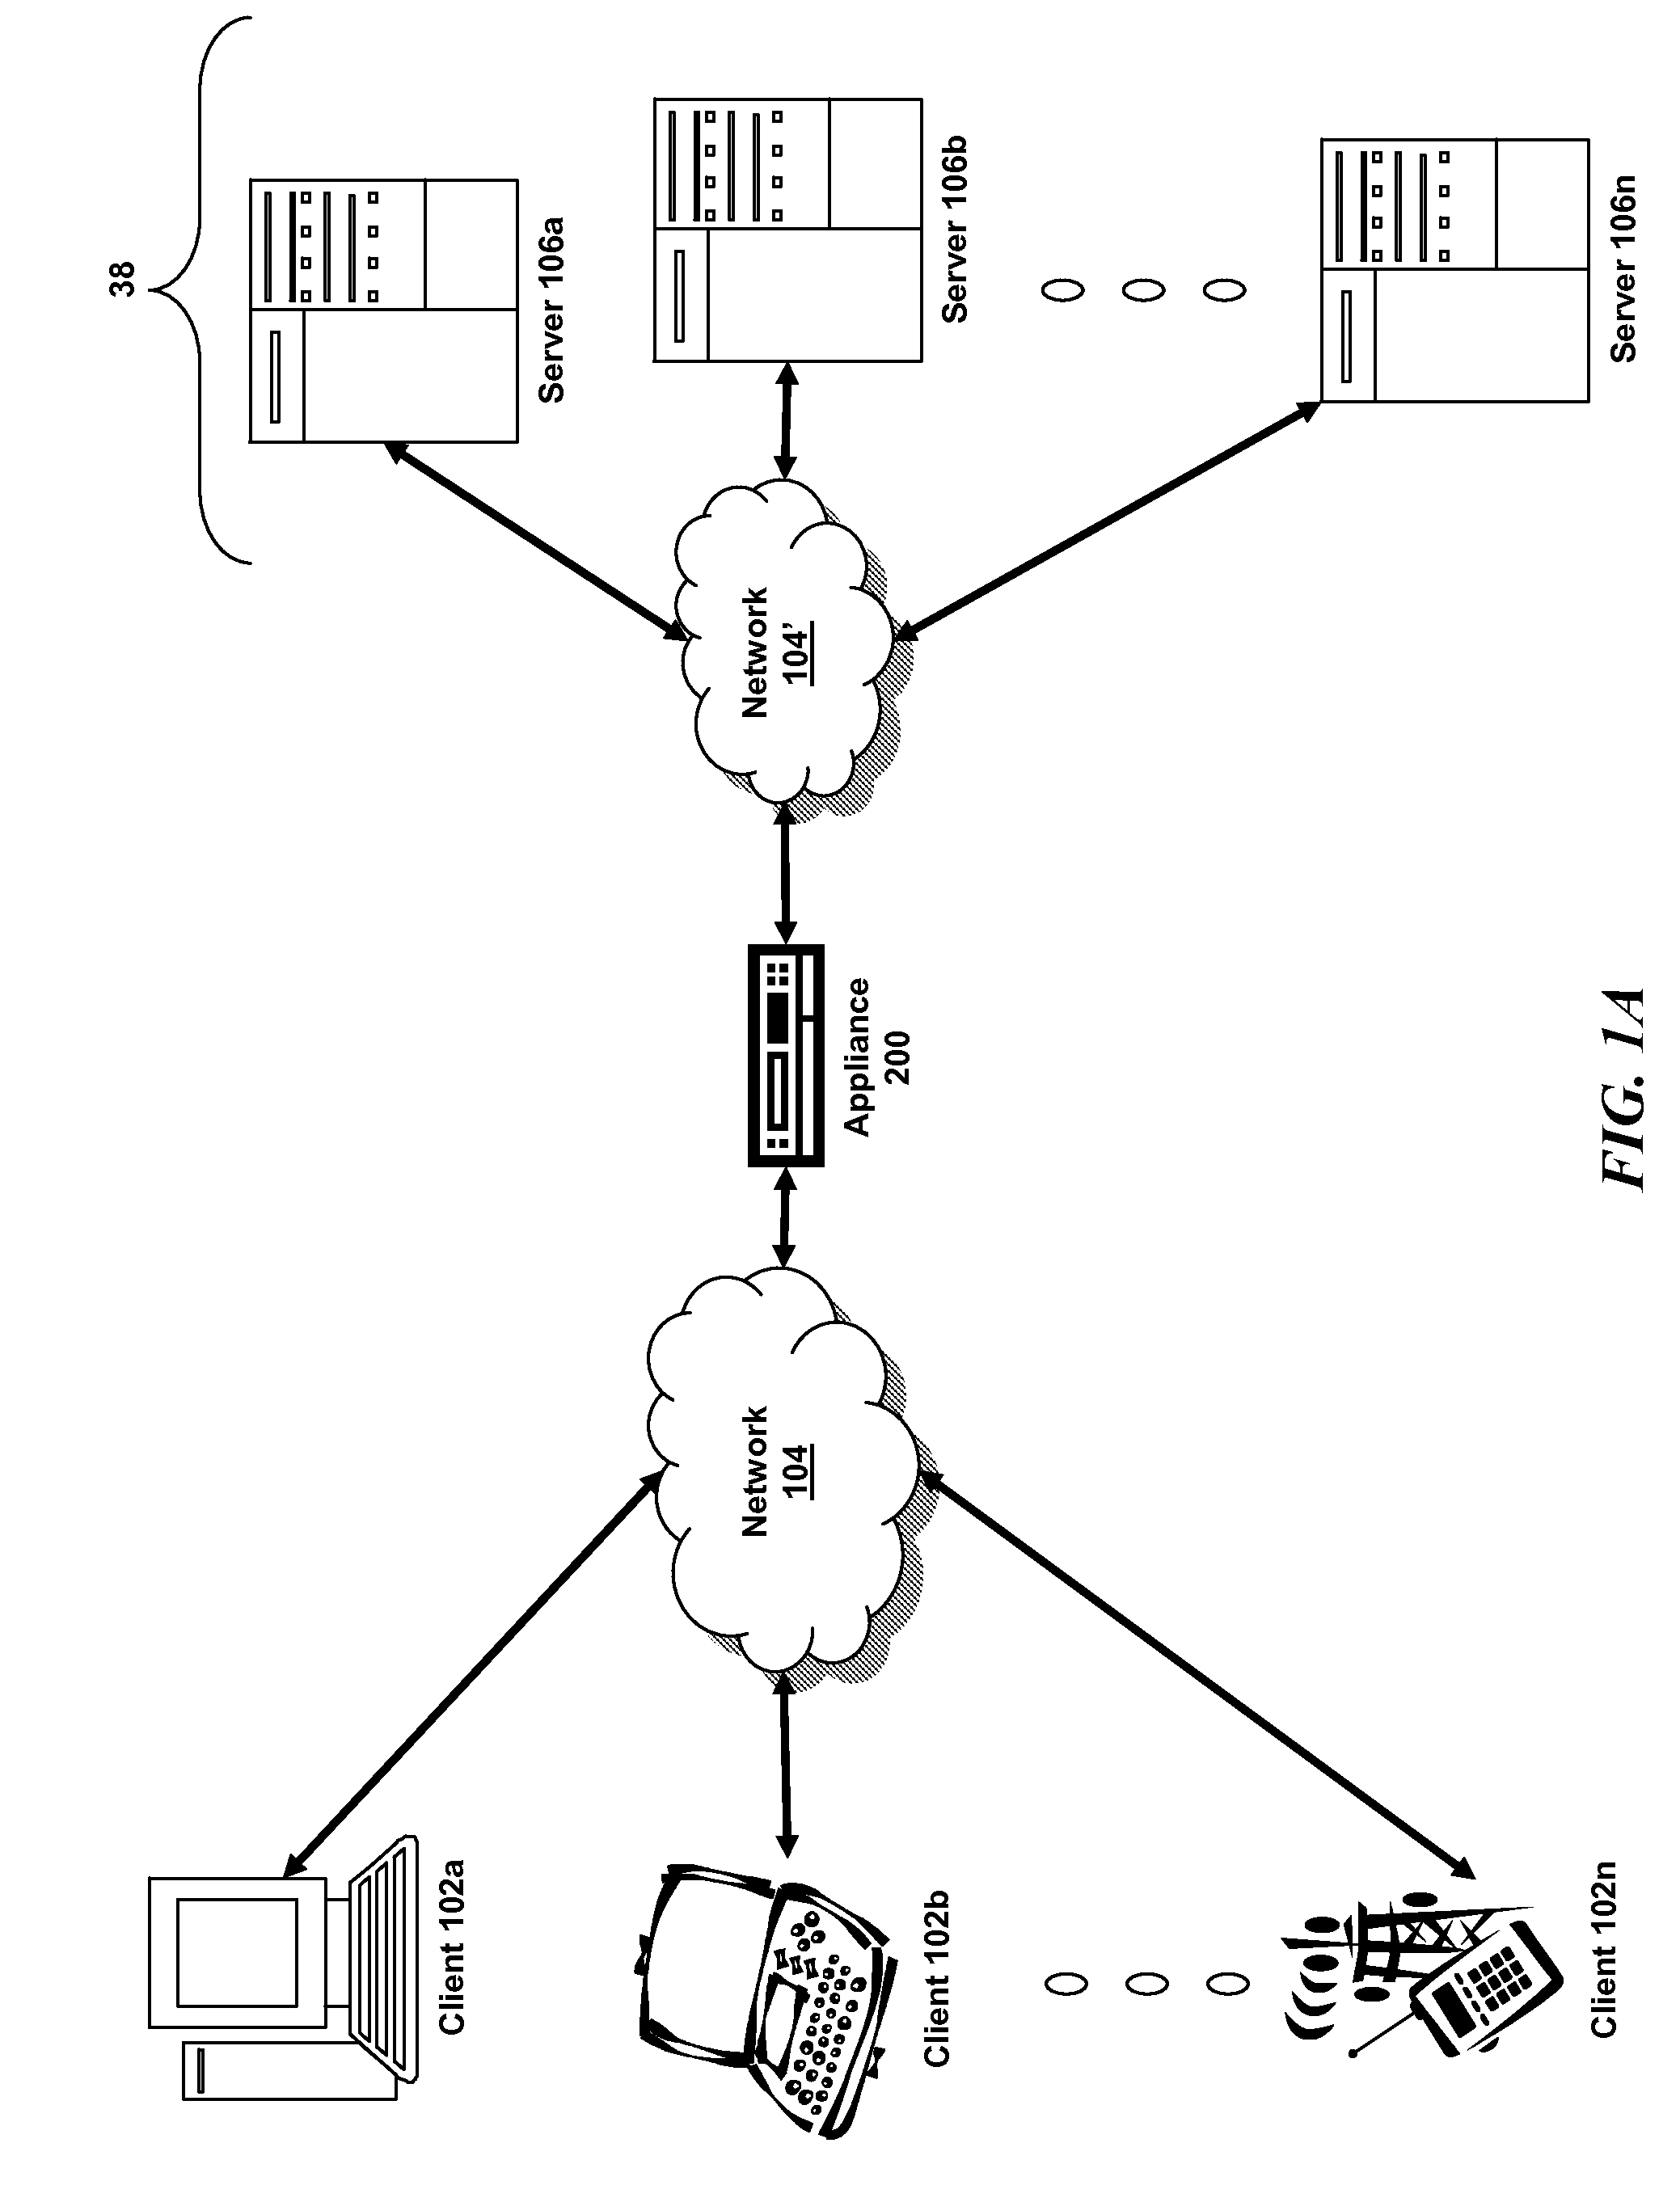 Systems and methods for object rate limiting in multi-core system